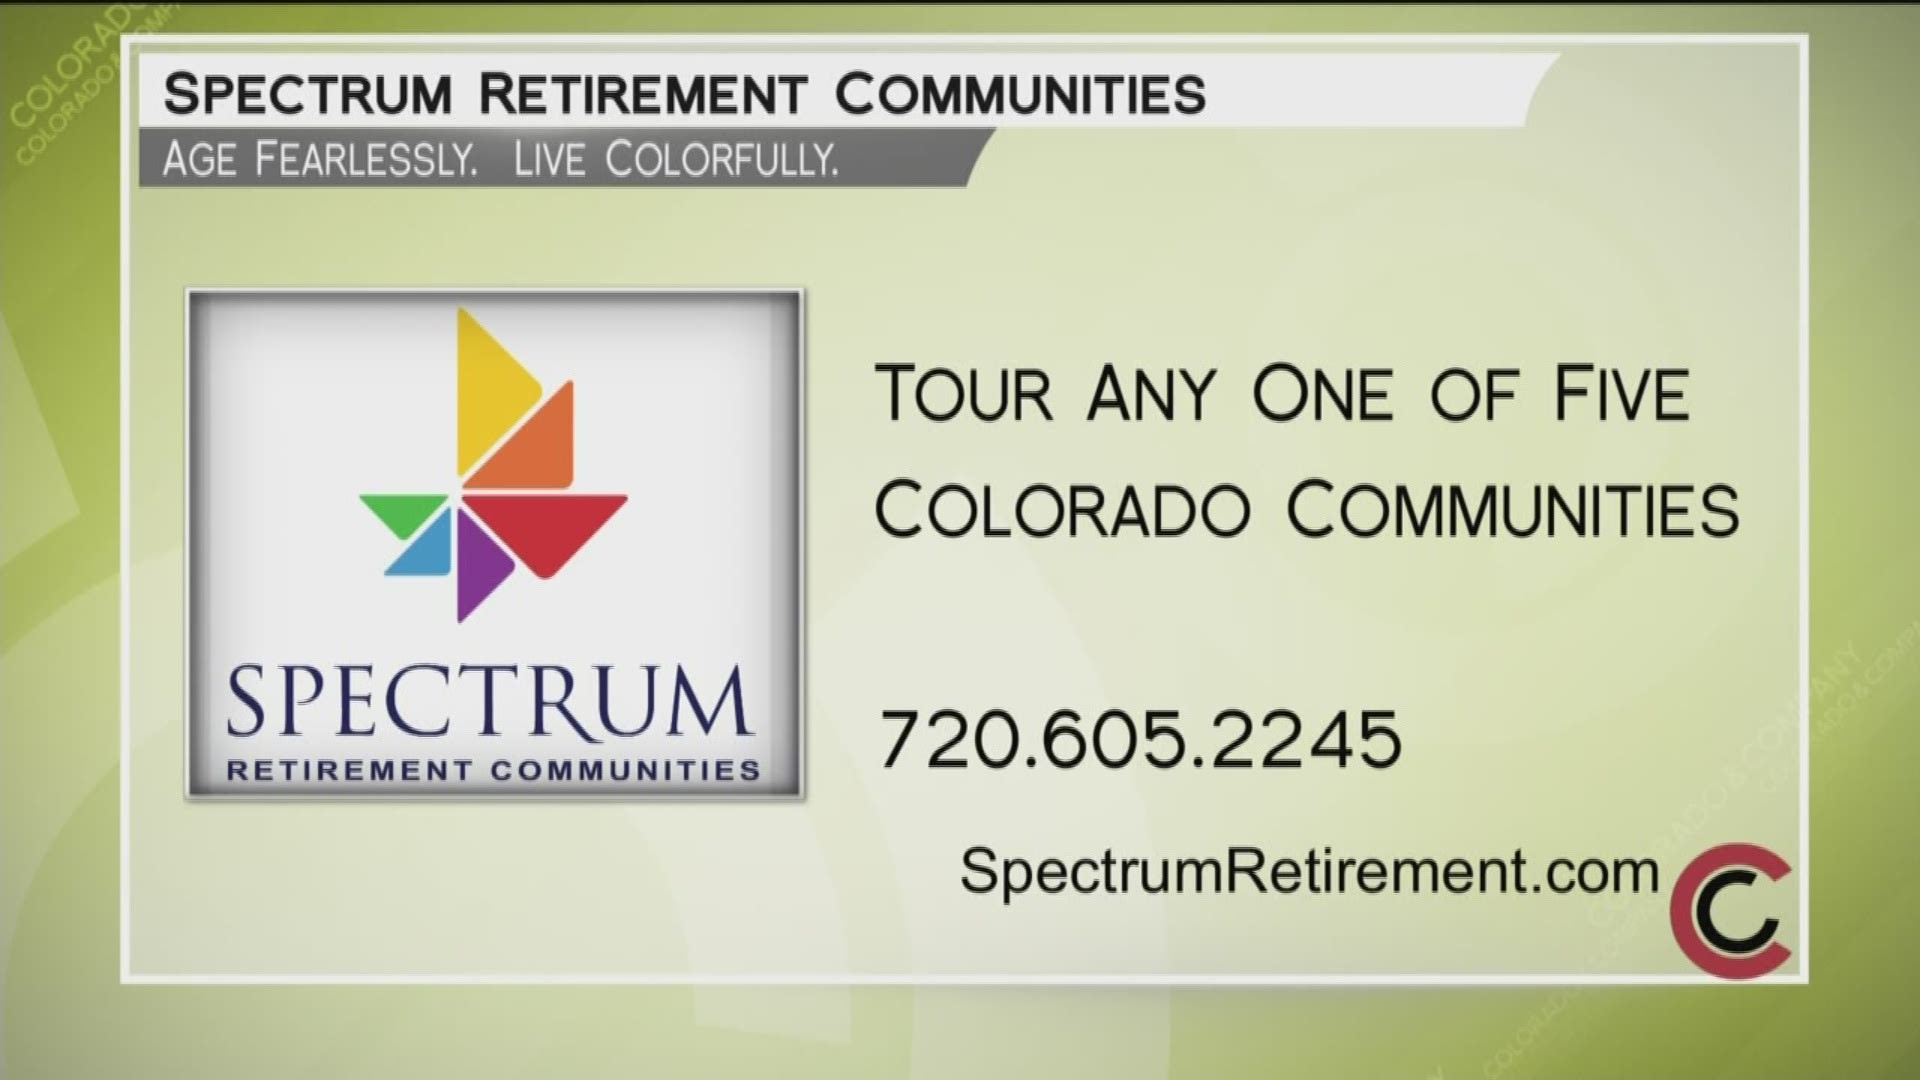 Visit SpectrumRetirement.com or call 720.605.2245 to take a tour of a Spectrum Retirement community and make your next great journey in life at Spectrum.